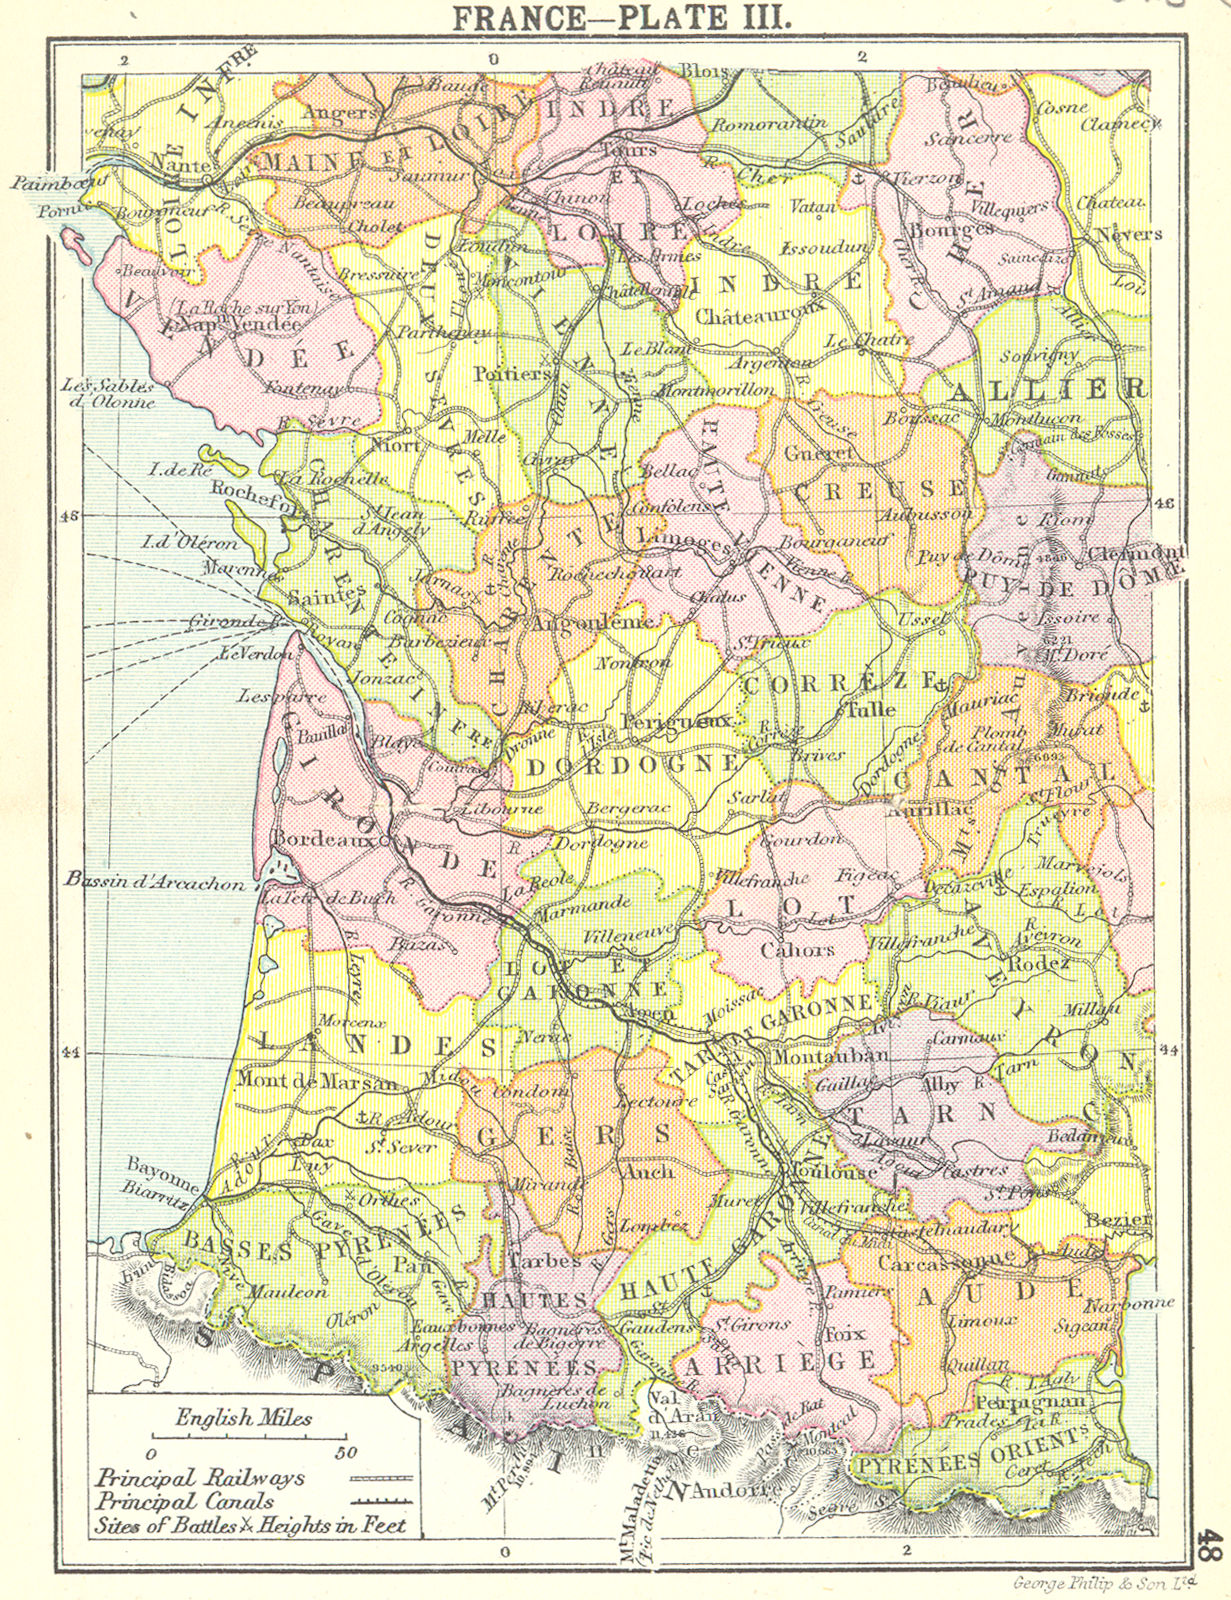 Associate Product FRANCE. France-Plate III; Small map 1912 old antique vintage plan chart